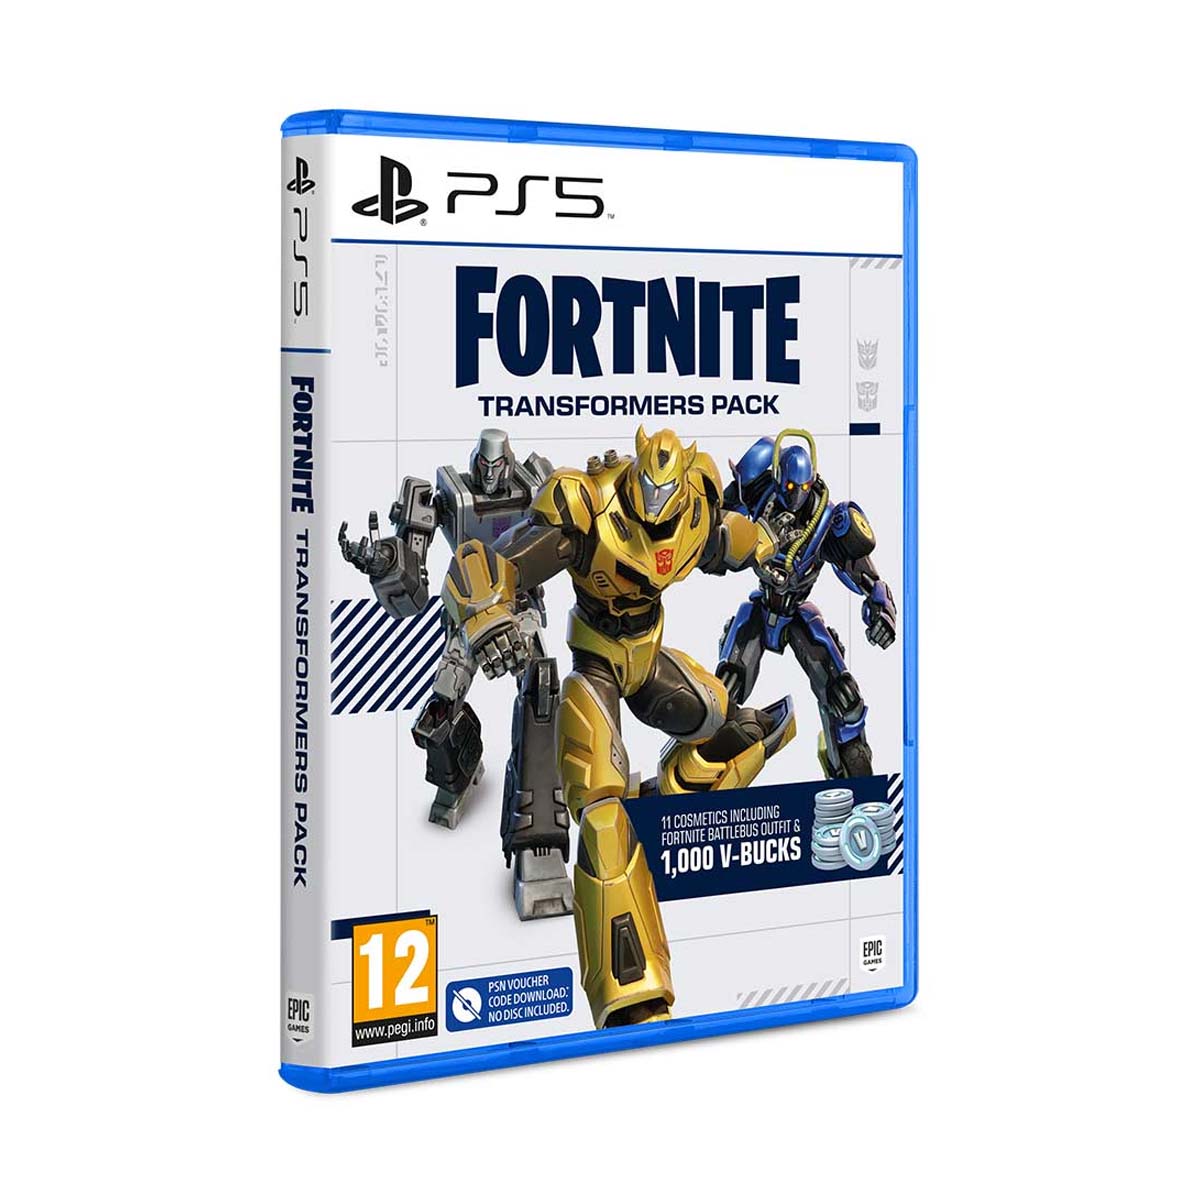 Fortnite Transformers Pack + 1000 V-Bucks Nintendo Switch DLC Code  Activation and Gameplay 